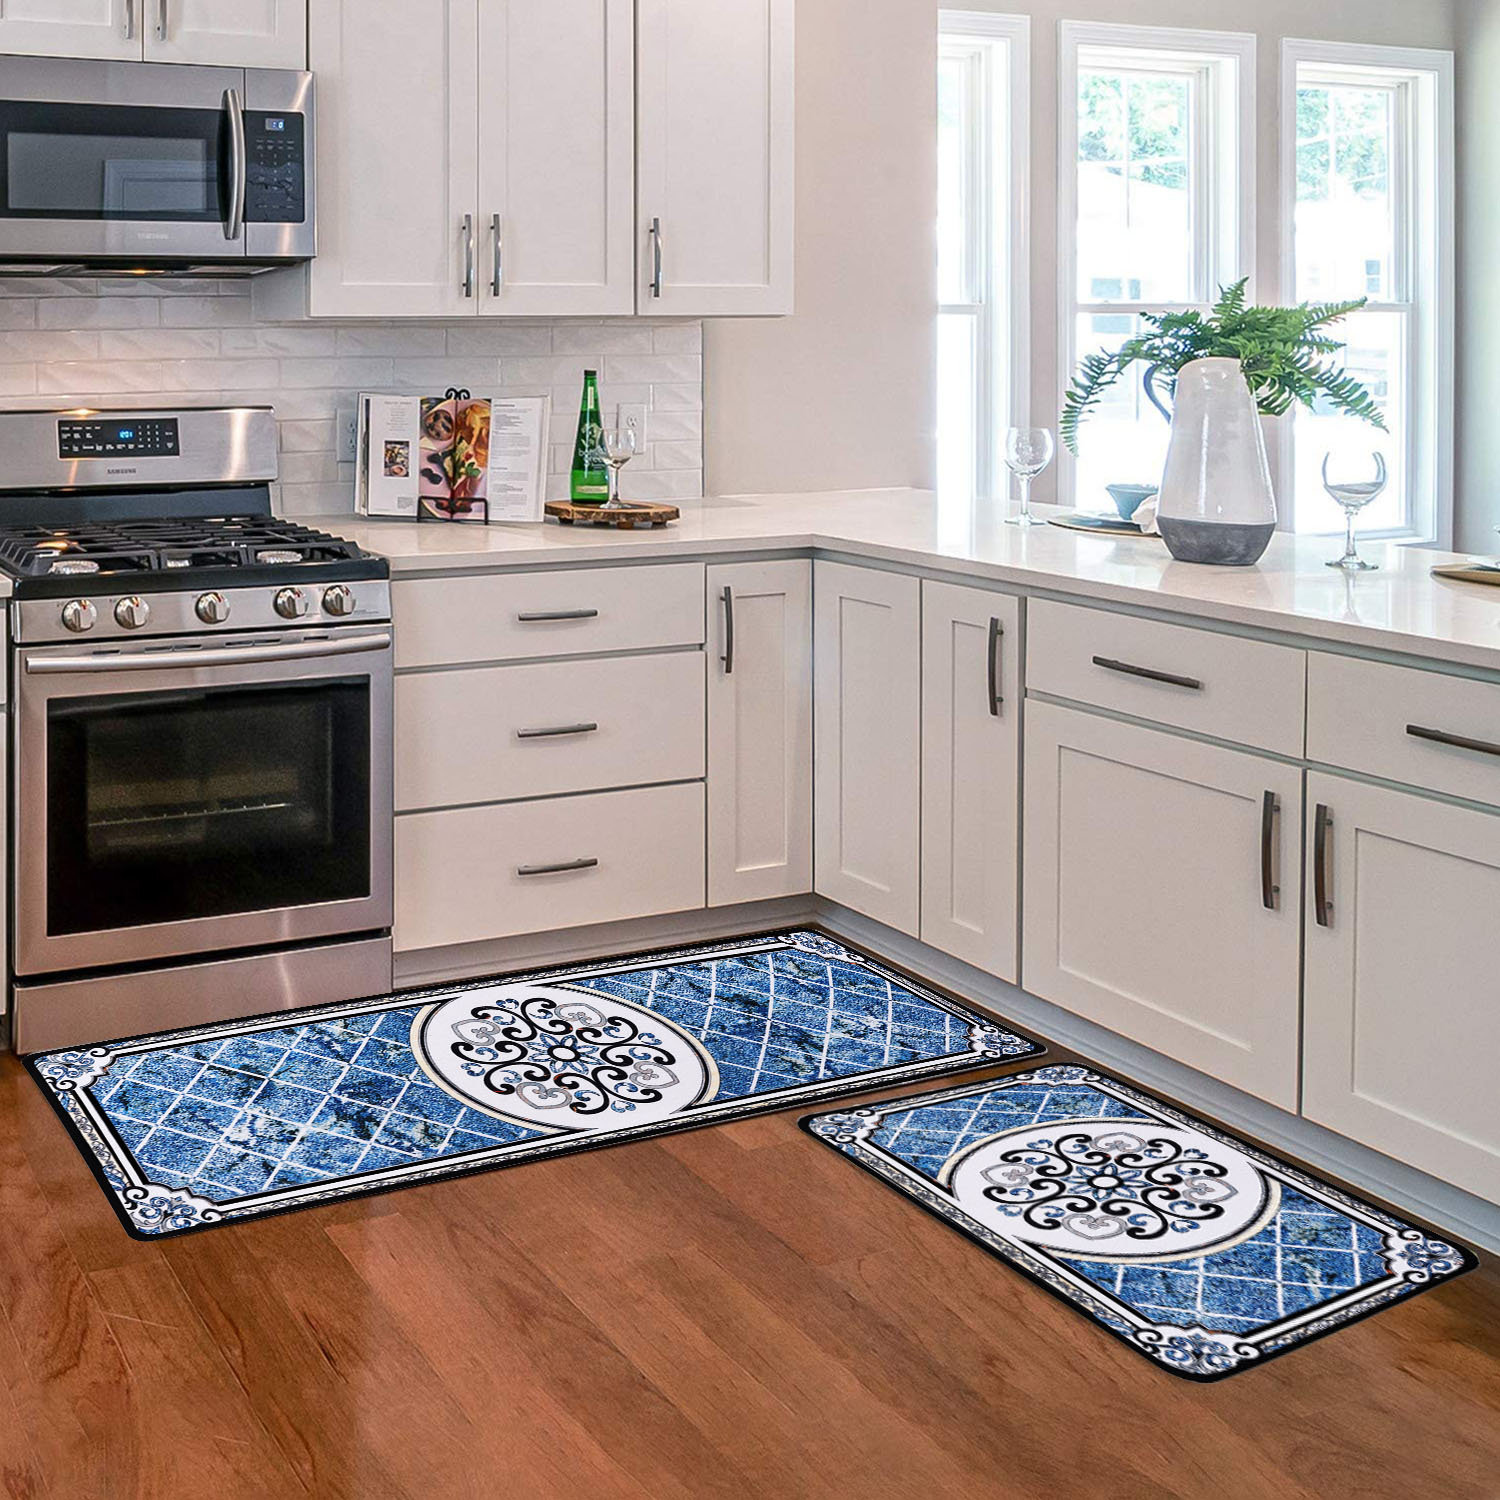 Pure Blue Floor Mat, Anti Fatigue Kitchen Rugs, Non-slip Decorative Rug, Cushion  Anti-fatigue Rug Office Floor Mat Comfort Standing Mats, Living Room  Bedroom Bathroom Kitchen Sink Laundry Office Area Rugs Runner, Home